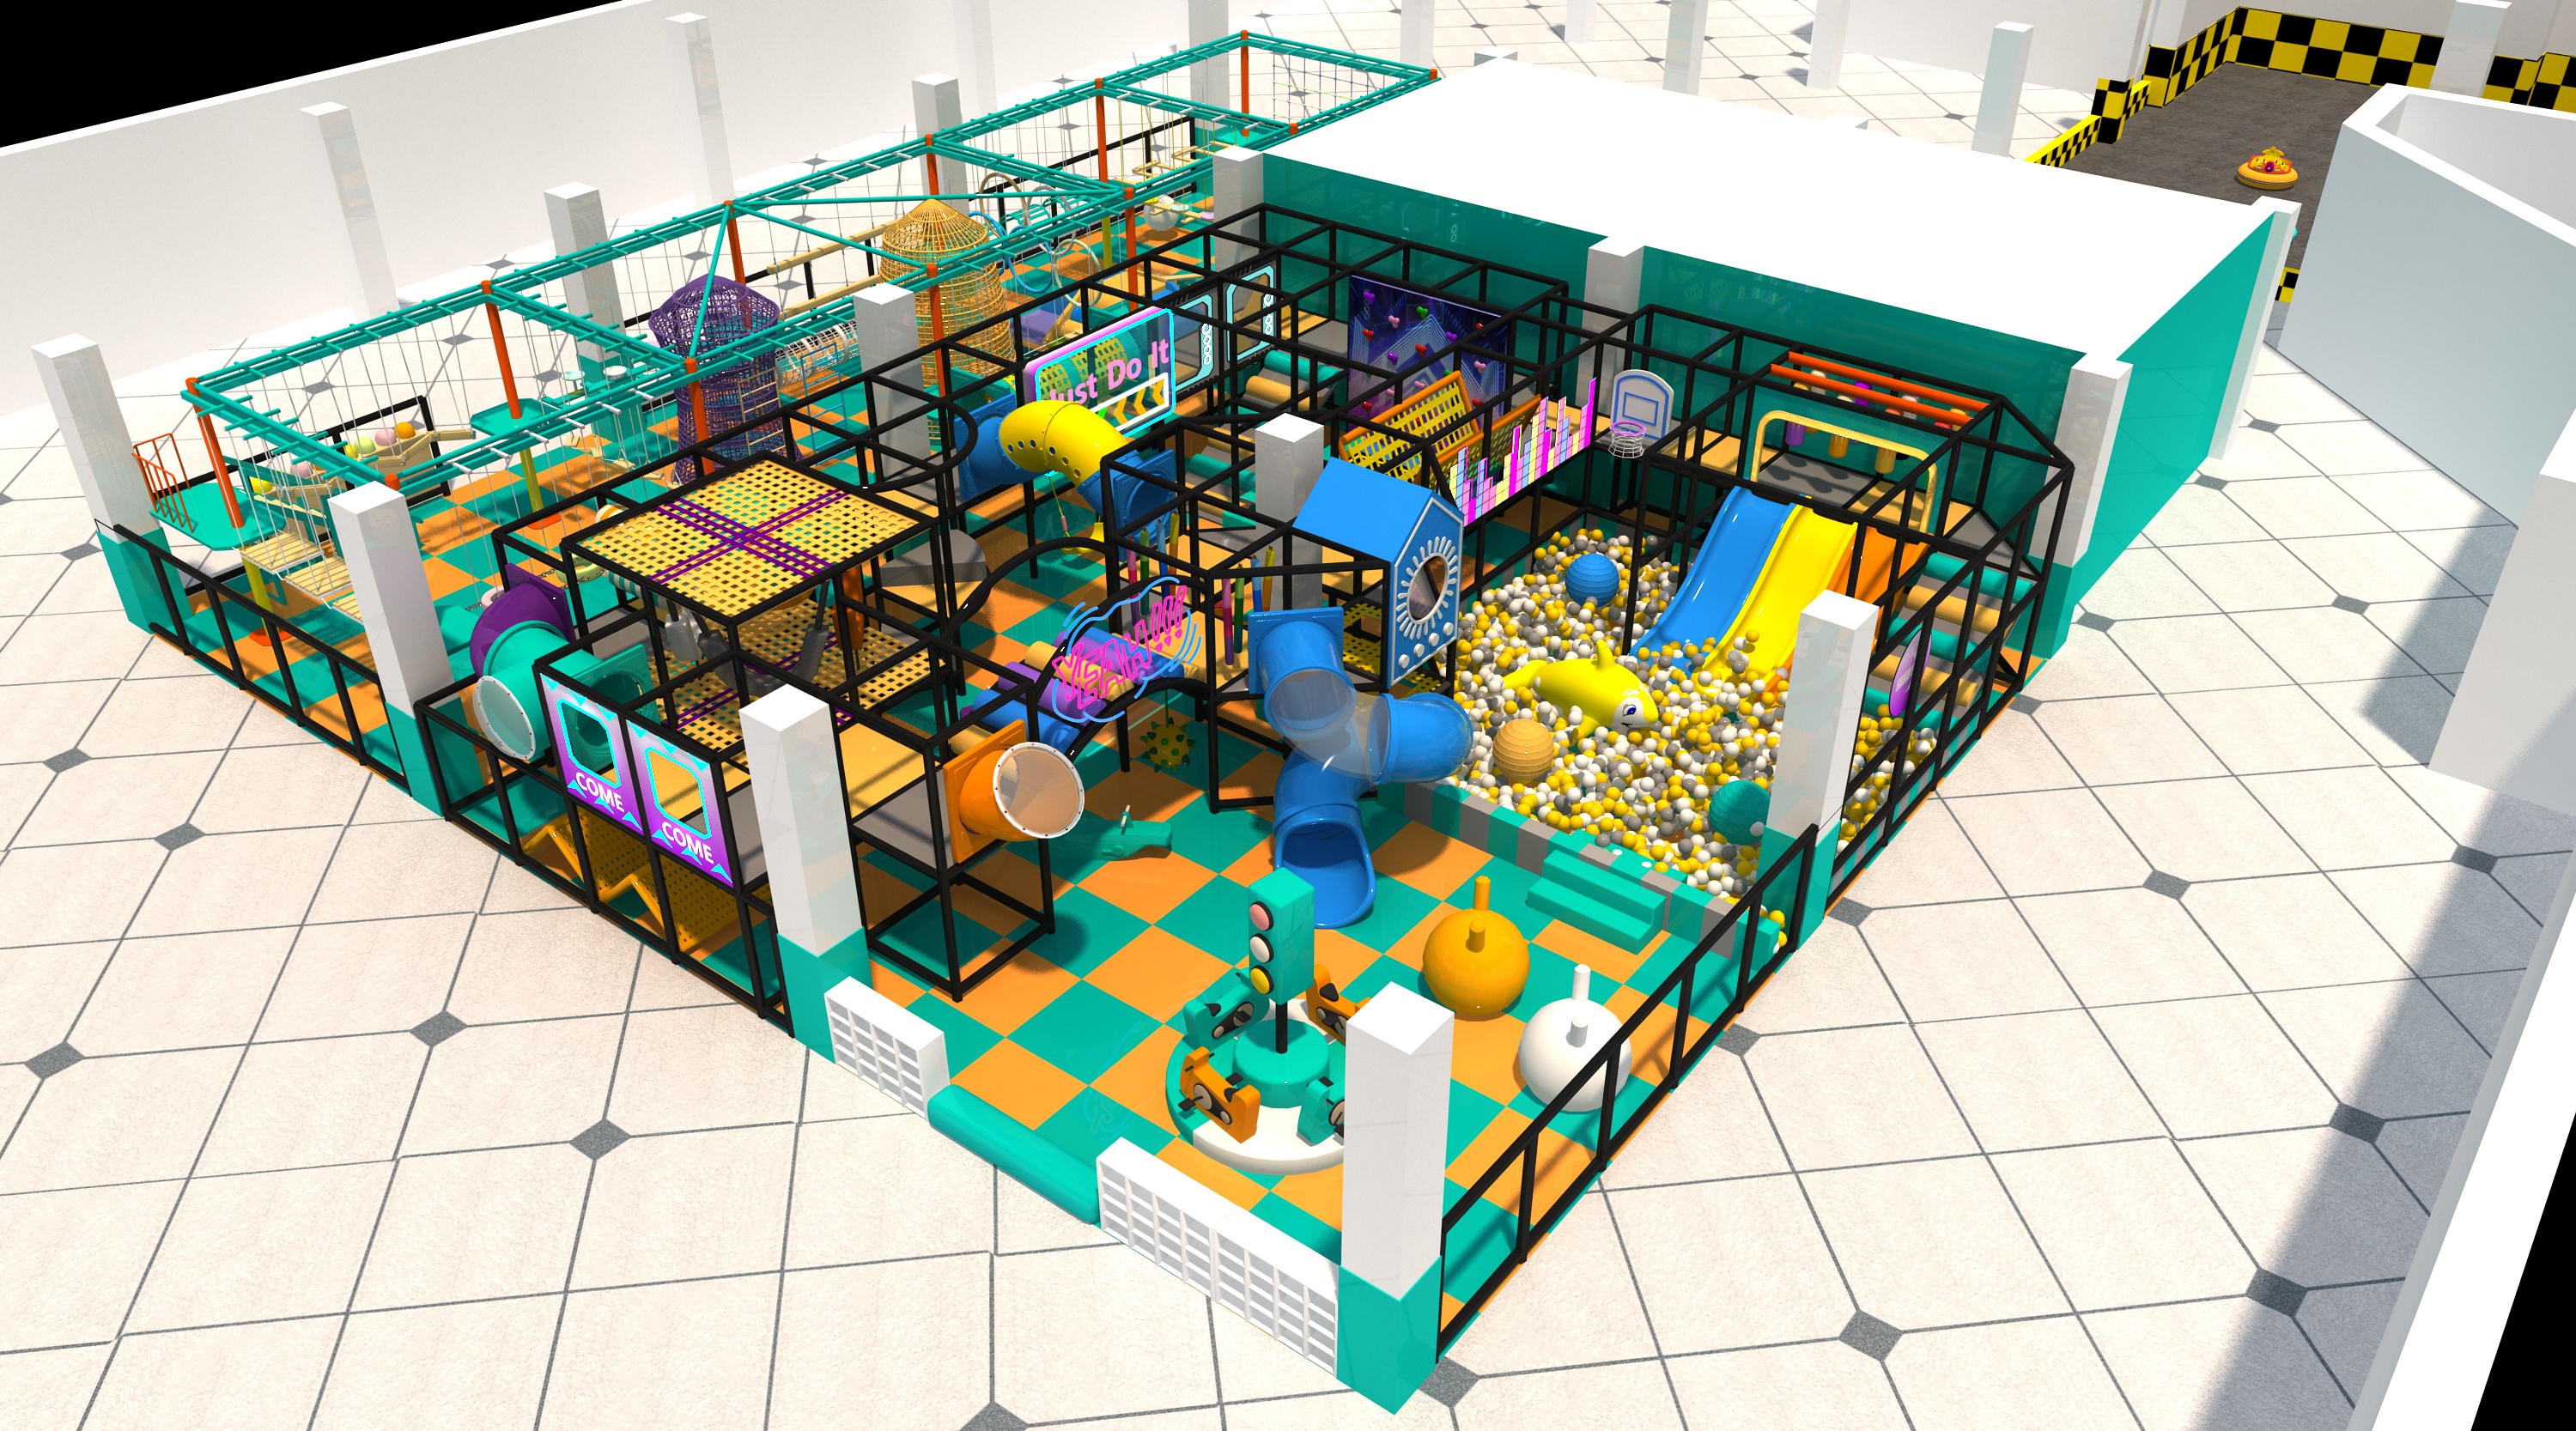 How Many Kids Can Play in This Indoor Playground Design? An In-Depth Analysis and Optimization Guide